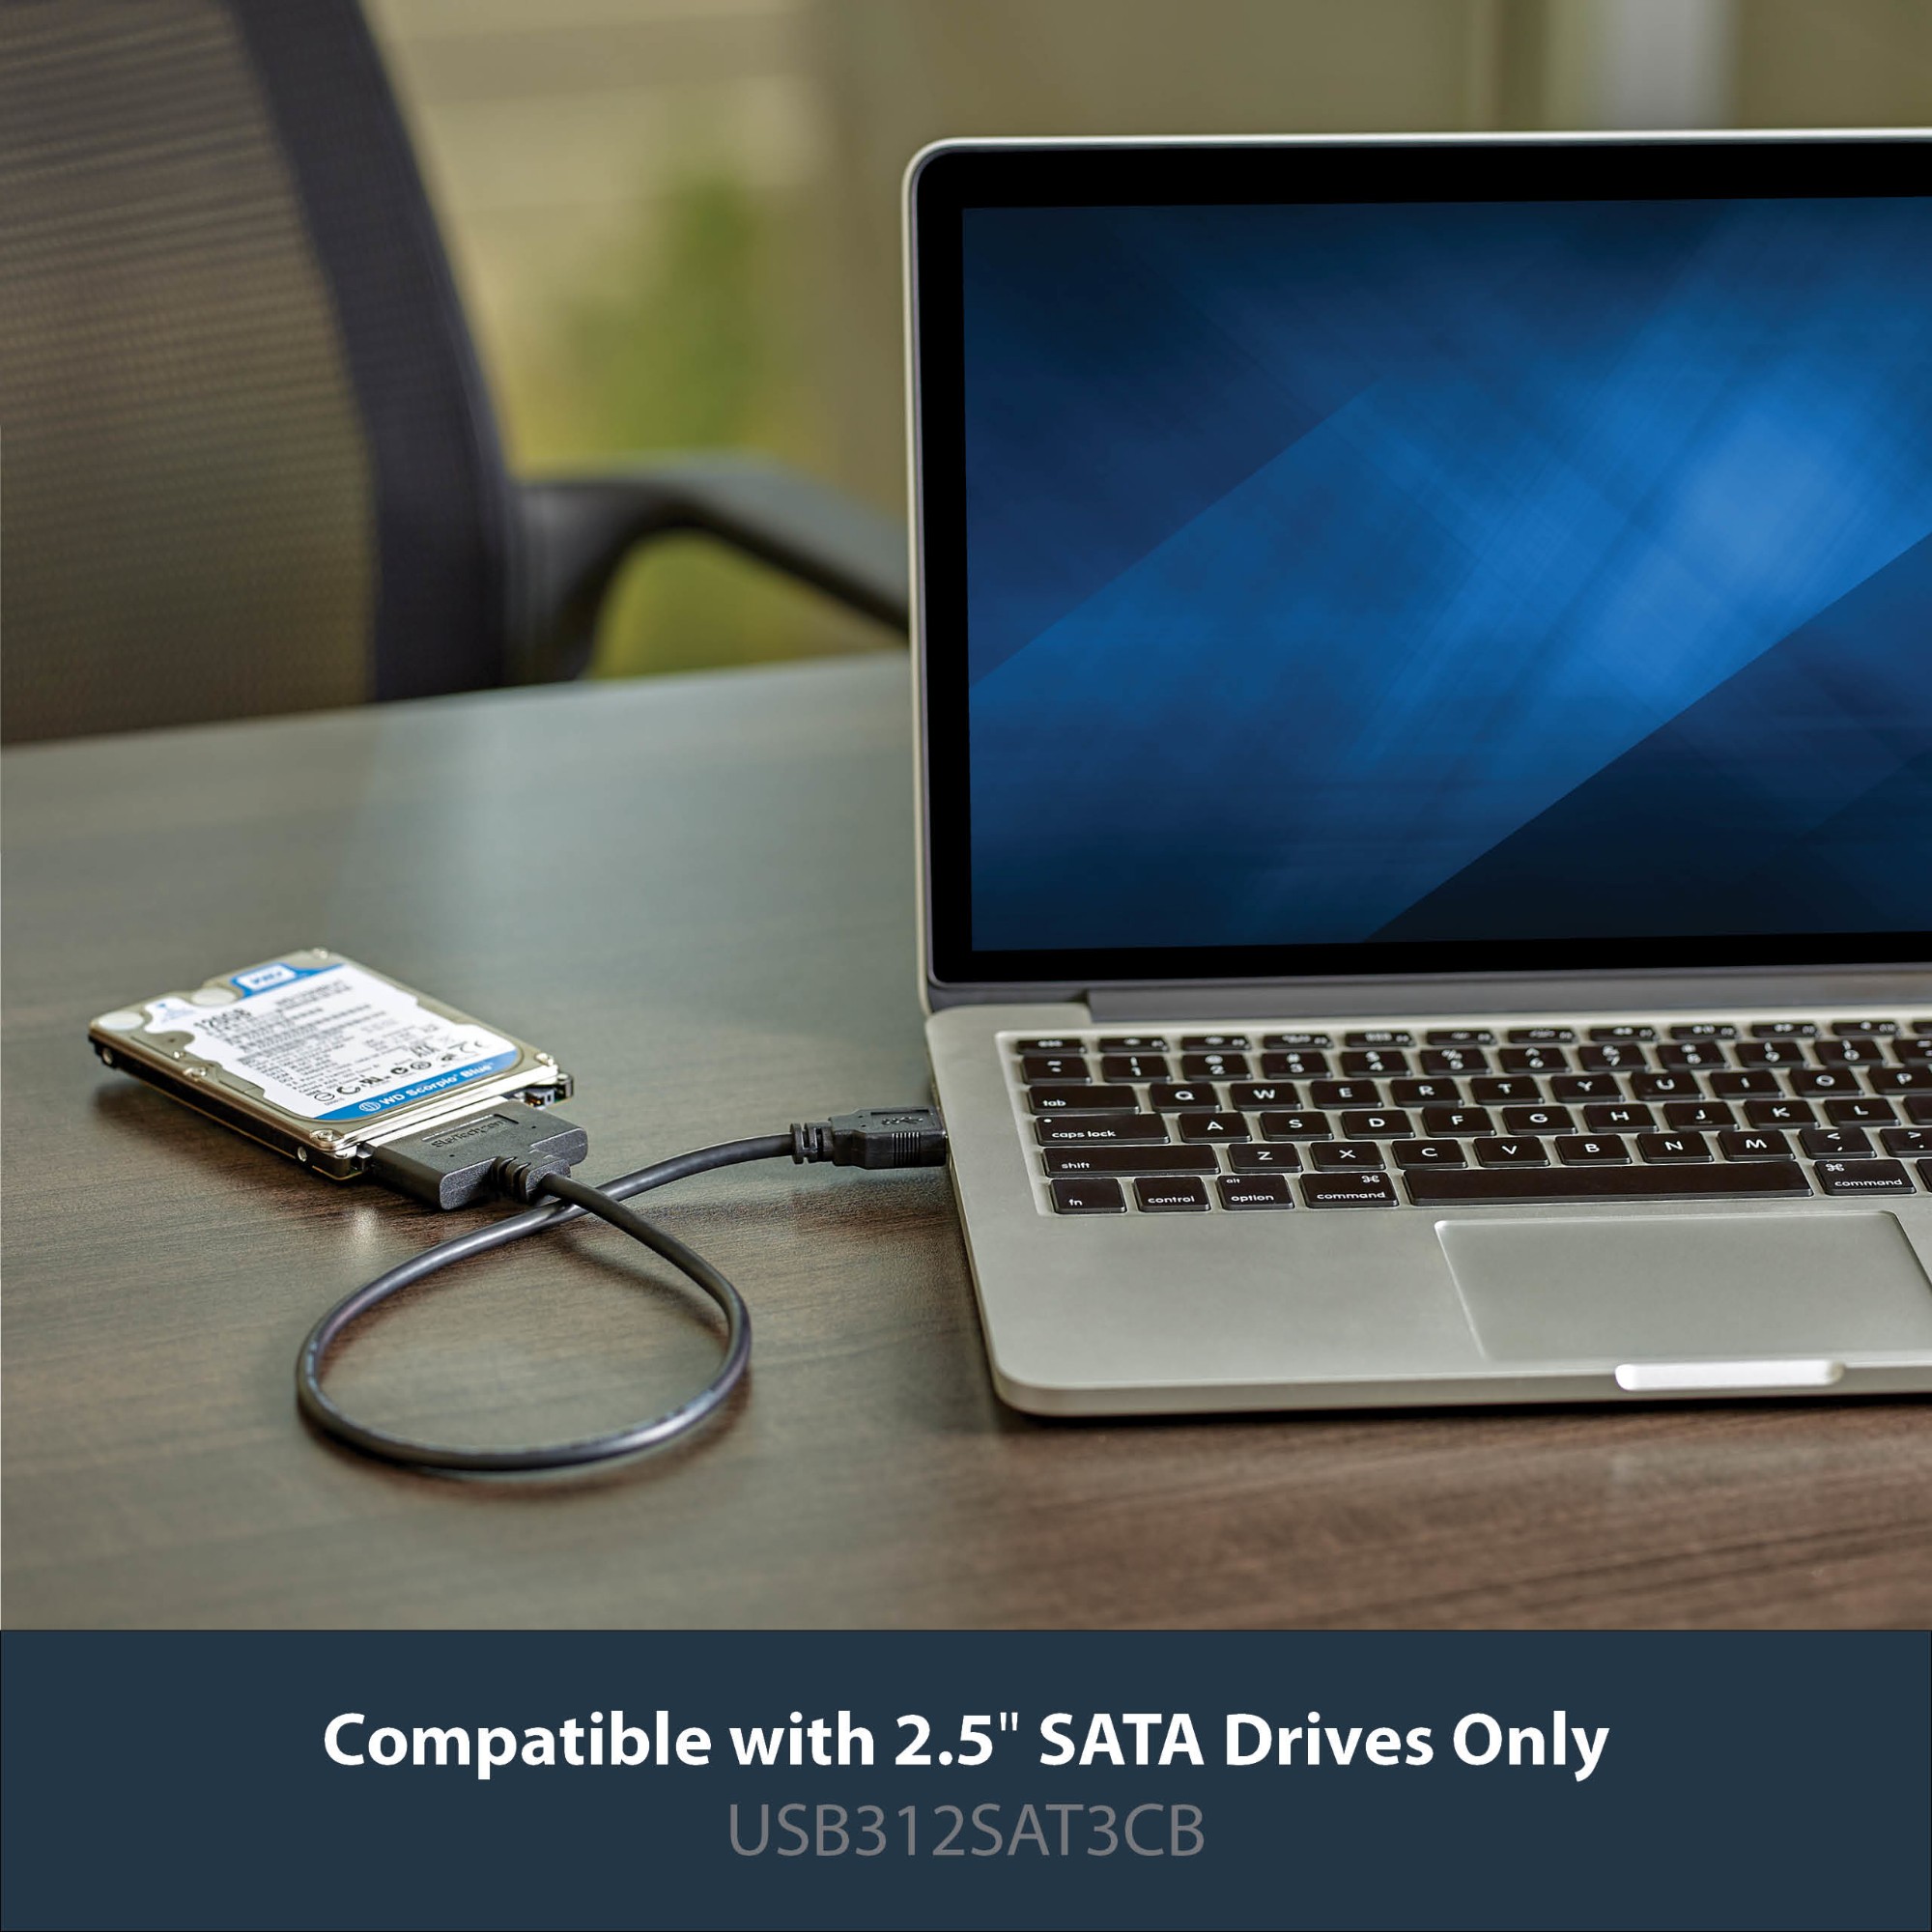 StarTech.com USB 3.1 (10Gbps) Adapter Cable for 2.5&quot; SATA Drives